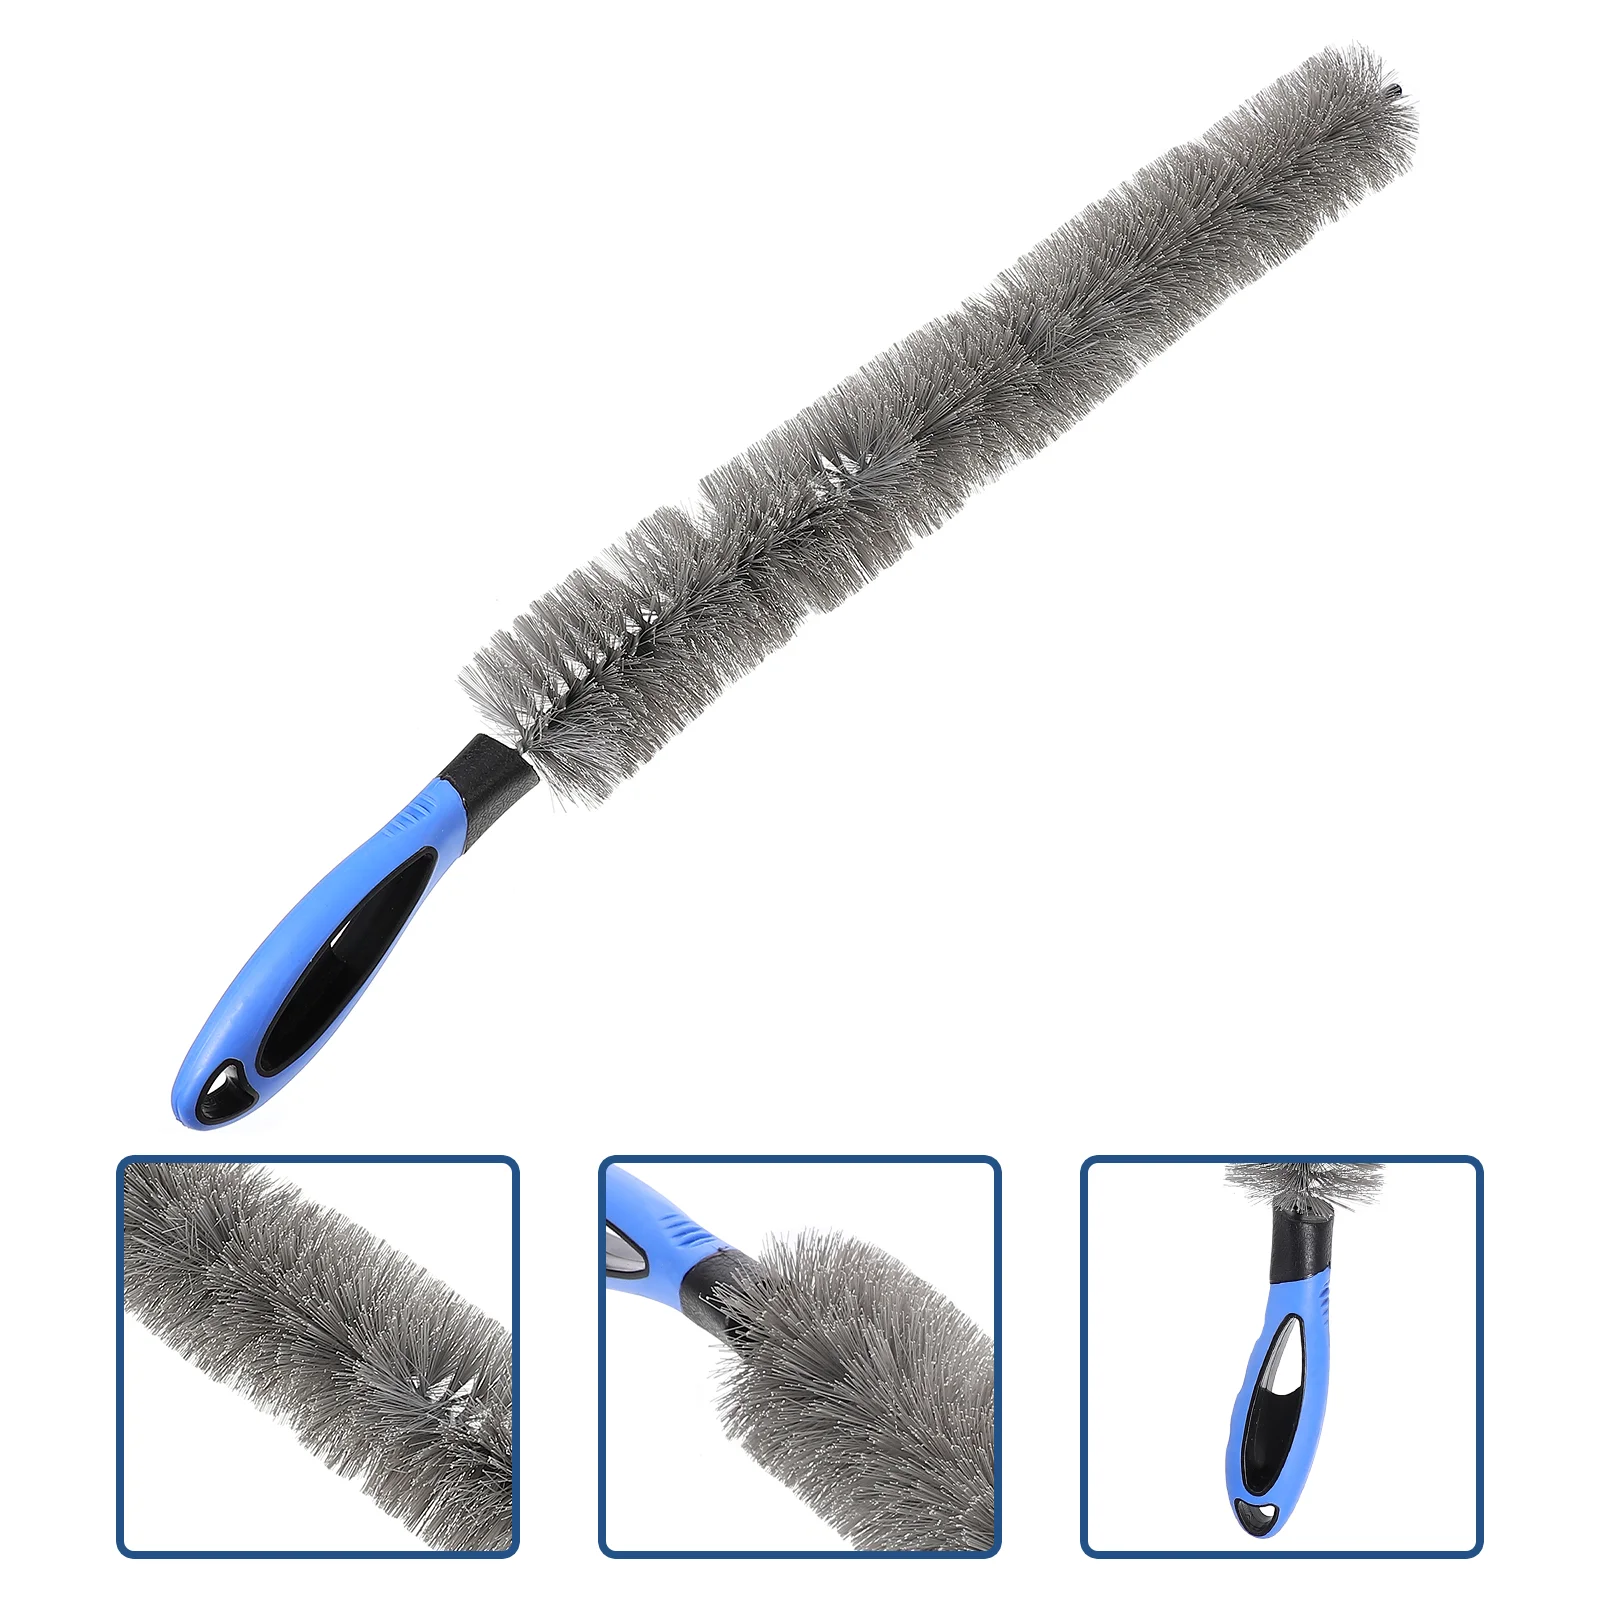 

Brush Cleaning Tool Radiator Coil Dryer Condenser Cleaner Refrigerator Dust Auger Home Remover Duct Lint Vent Household